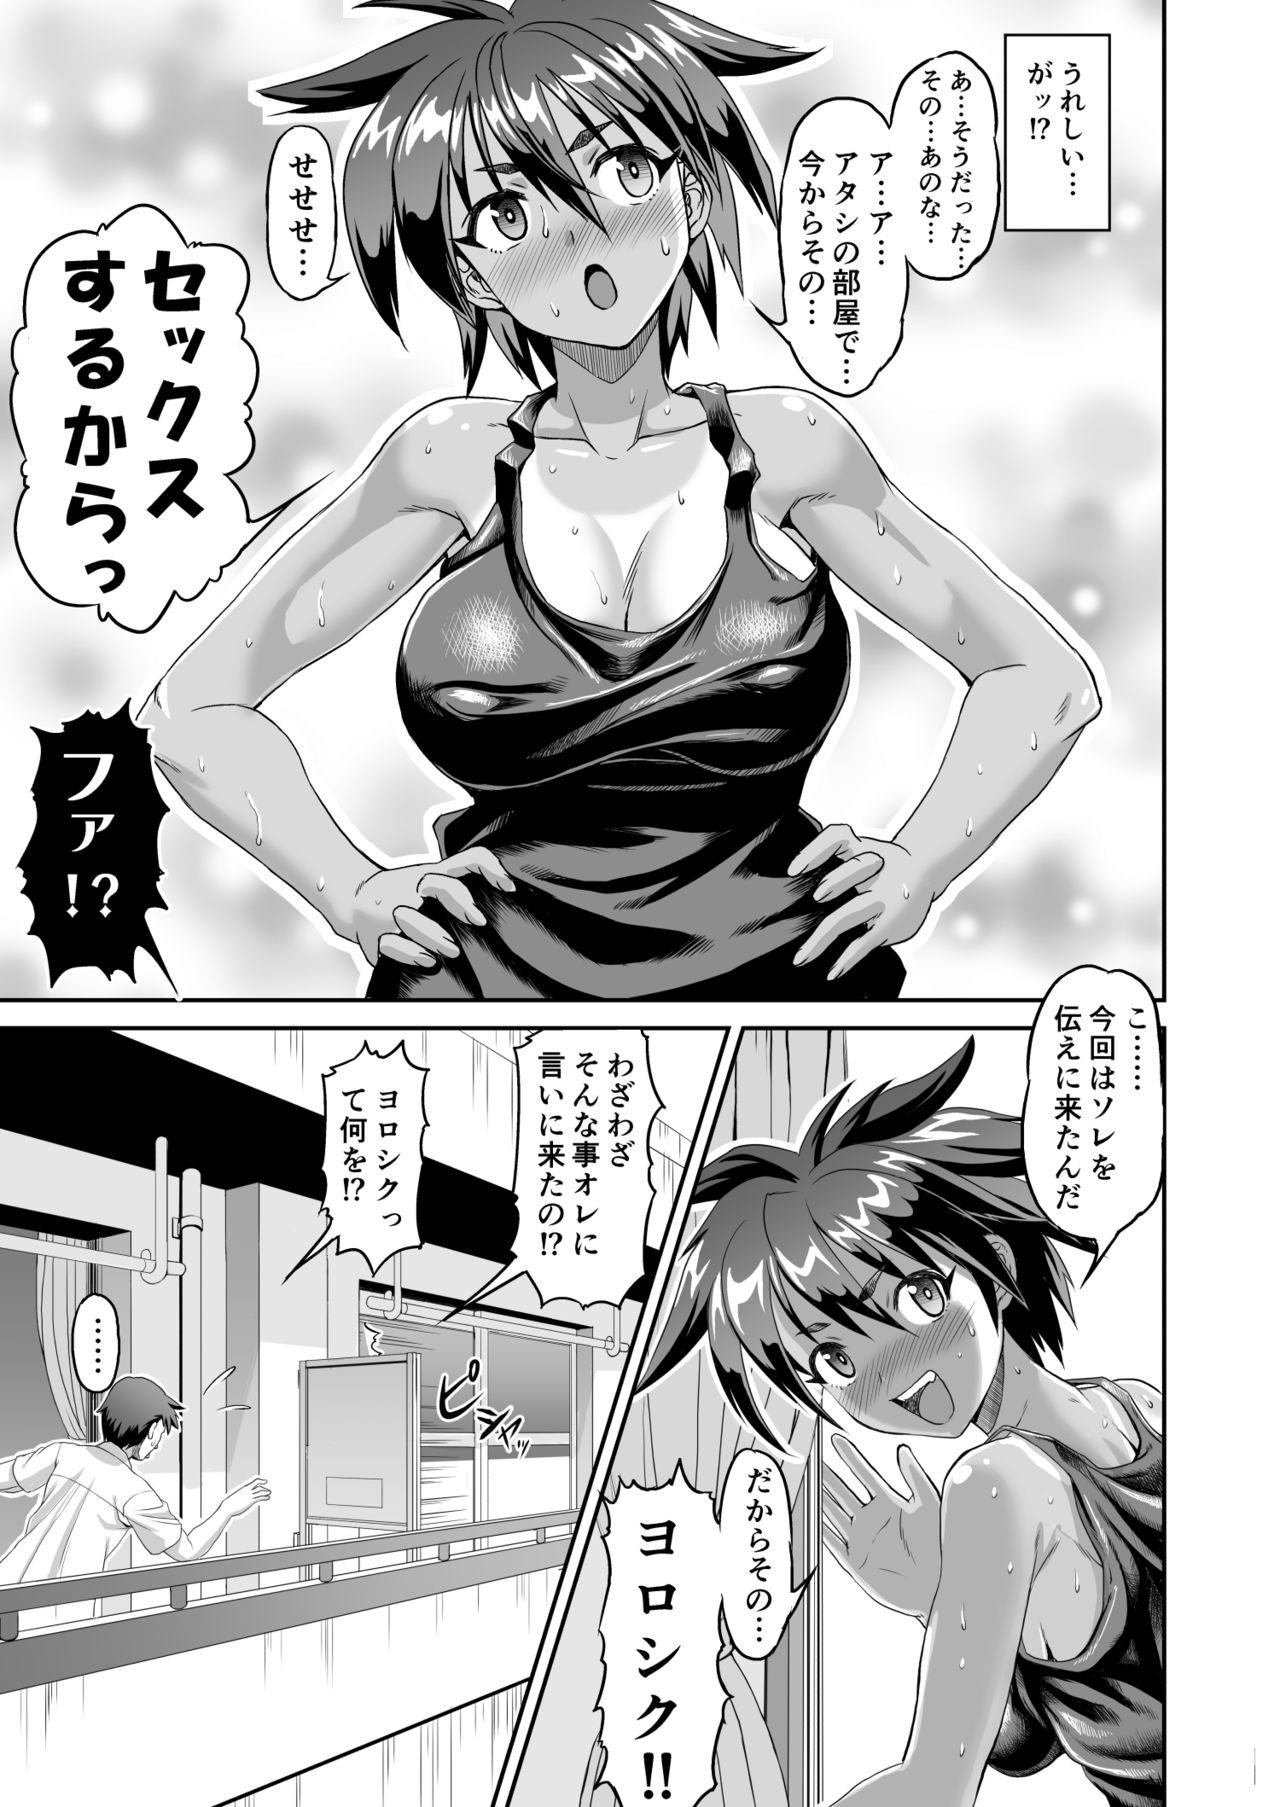 Dom 好淫、矢のごとし! - Original Sexy - Page 7